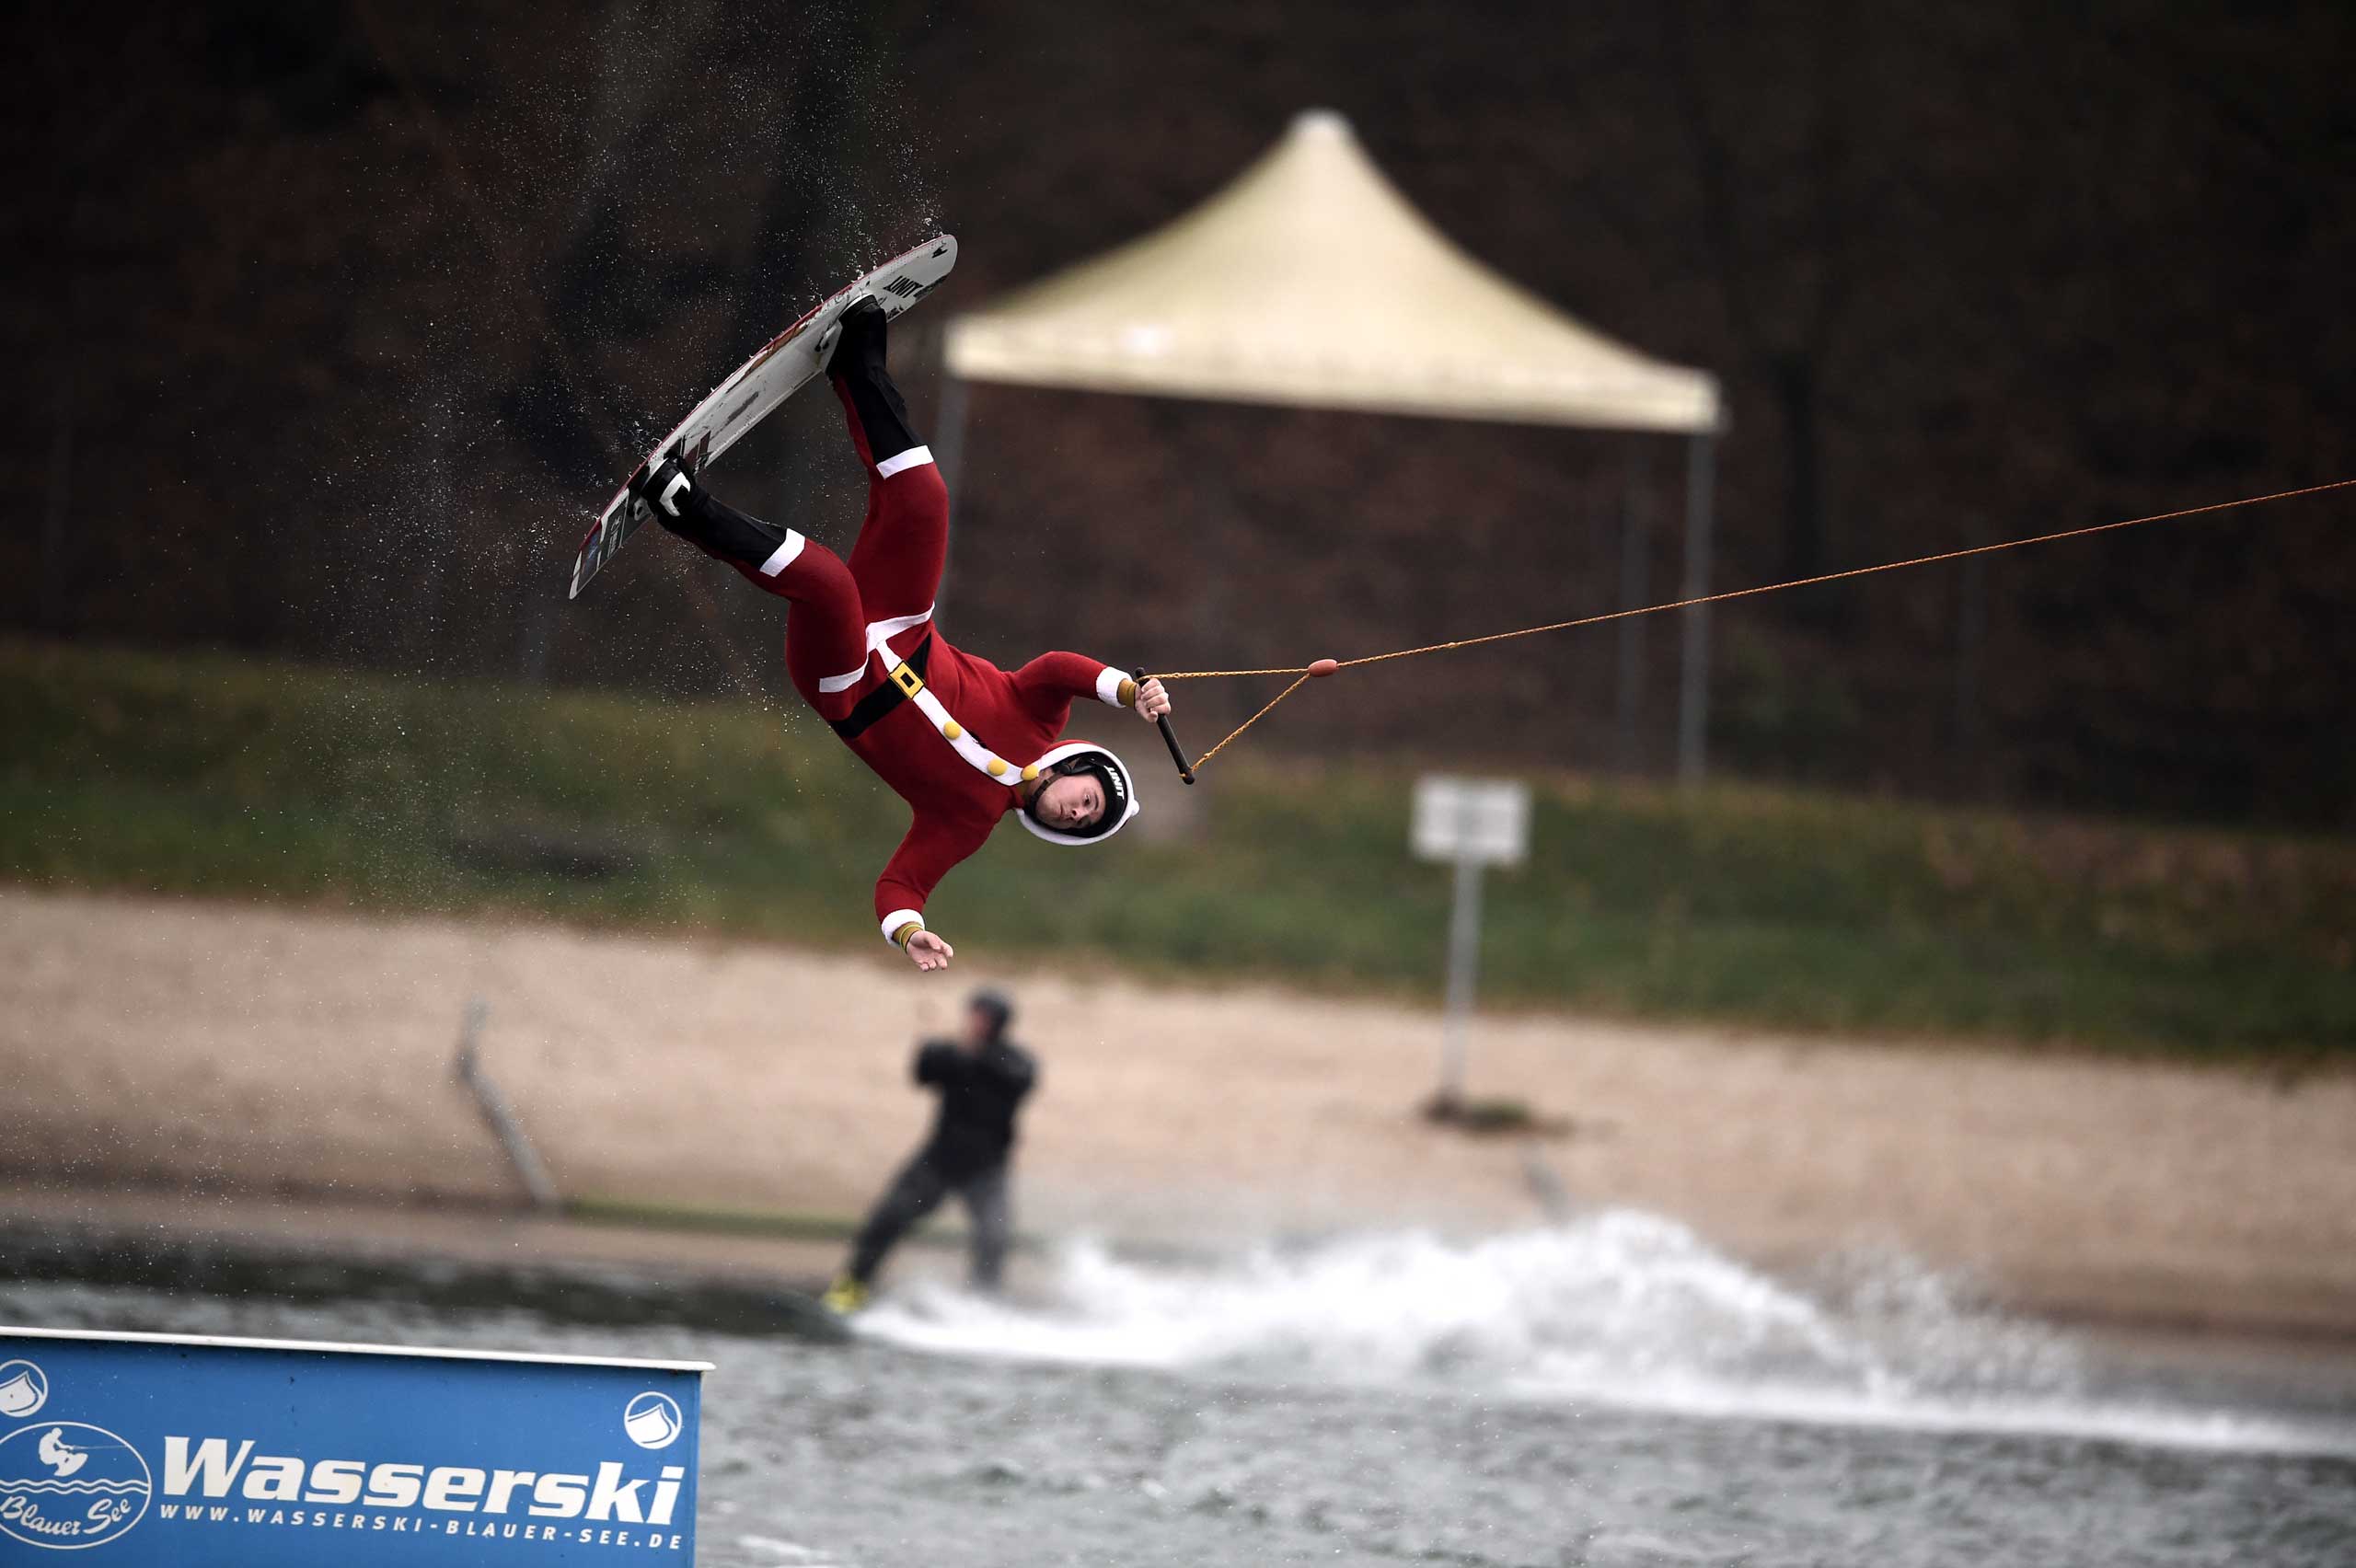 A man dressed as Santa Claus jumps over a barricade on a wakeboard on the Blauer See lake in Garbsen, Germany on Dec. 6, 2014.